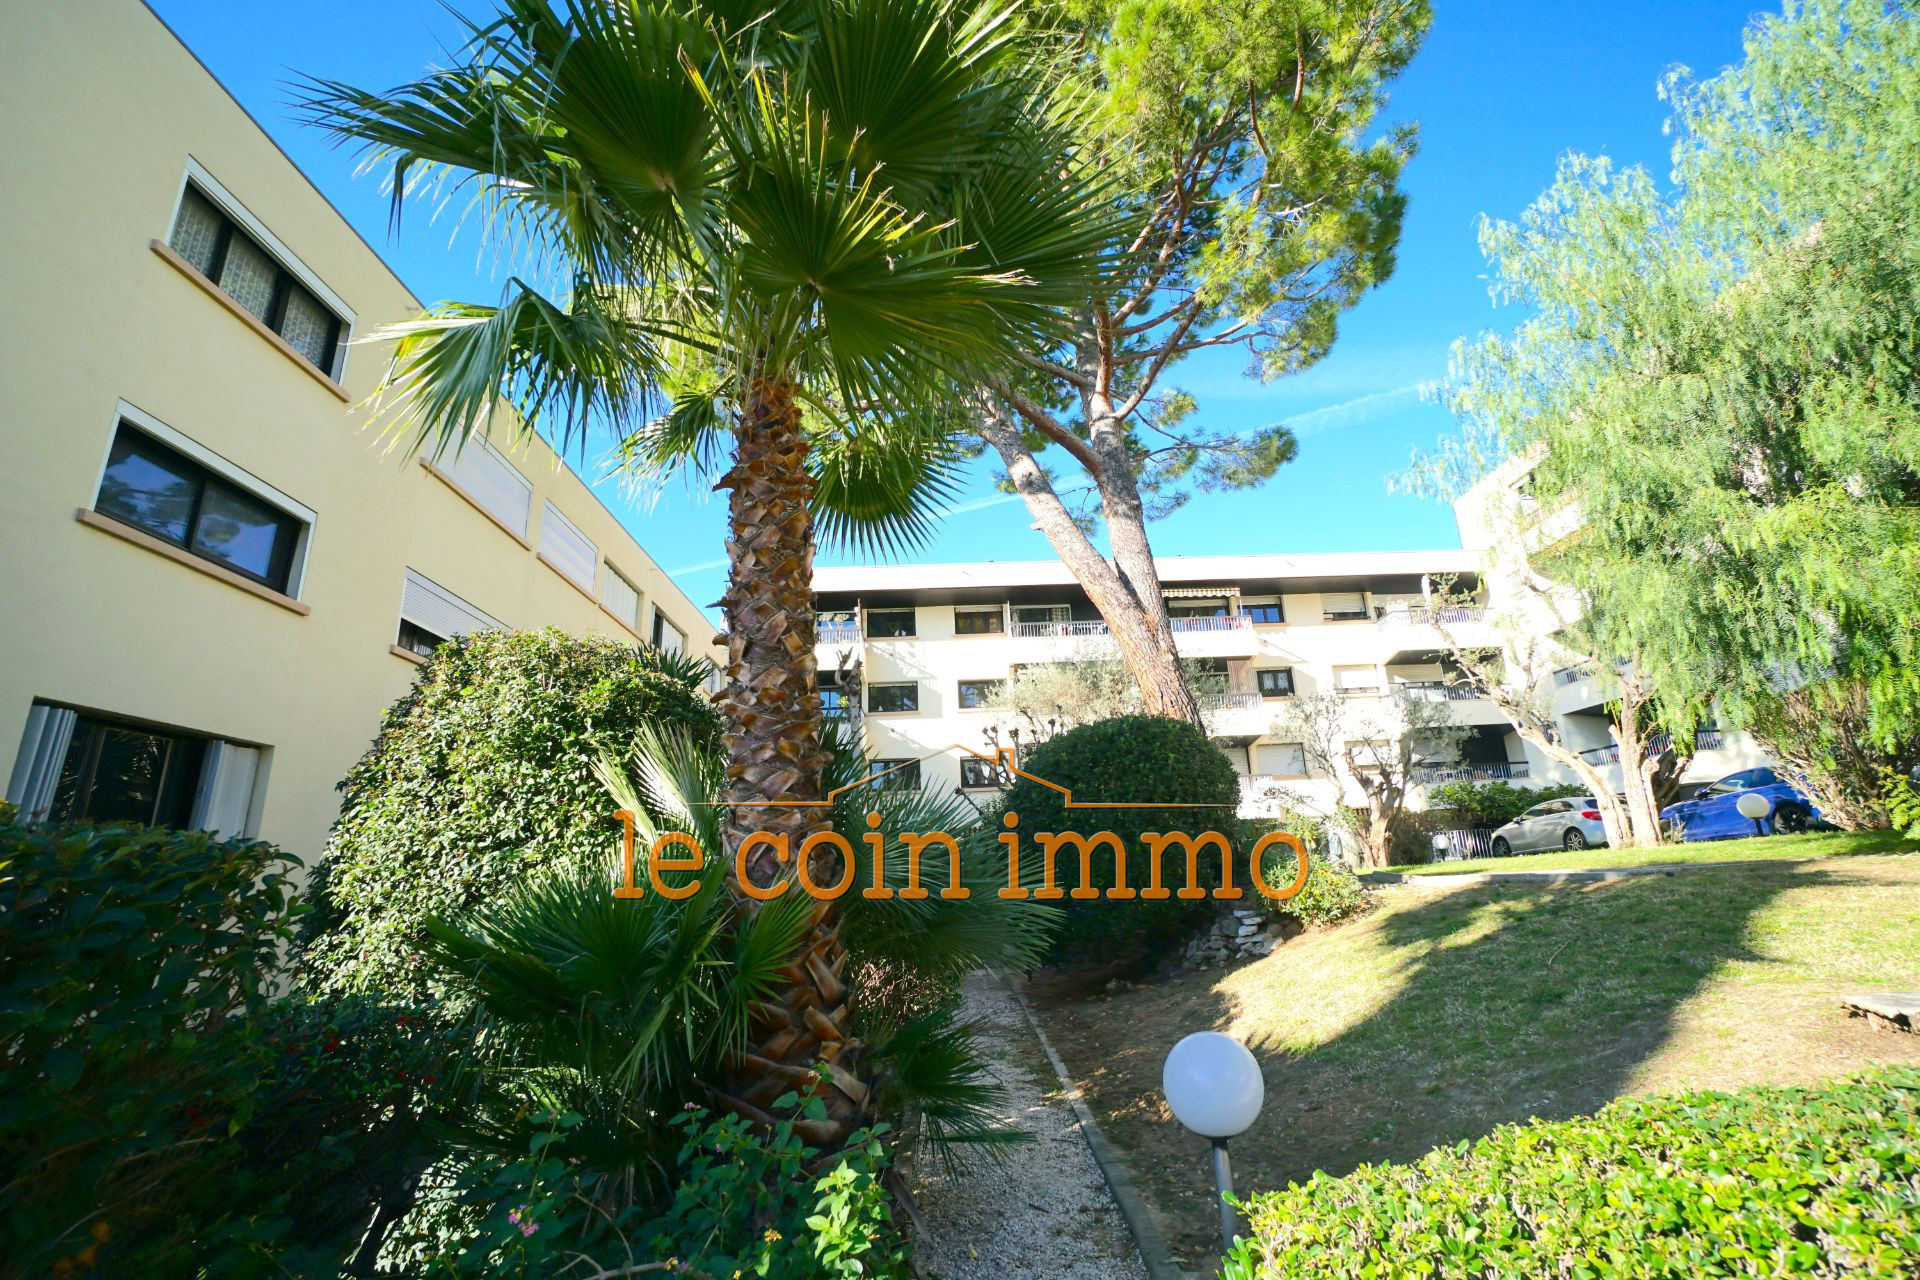 Vente Appartement 55m² à Antibes (06600) - Le Coin Immo